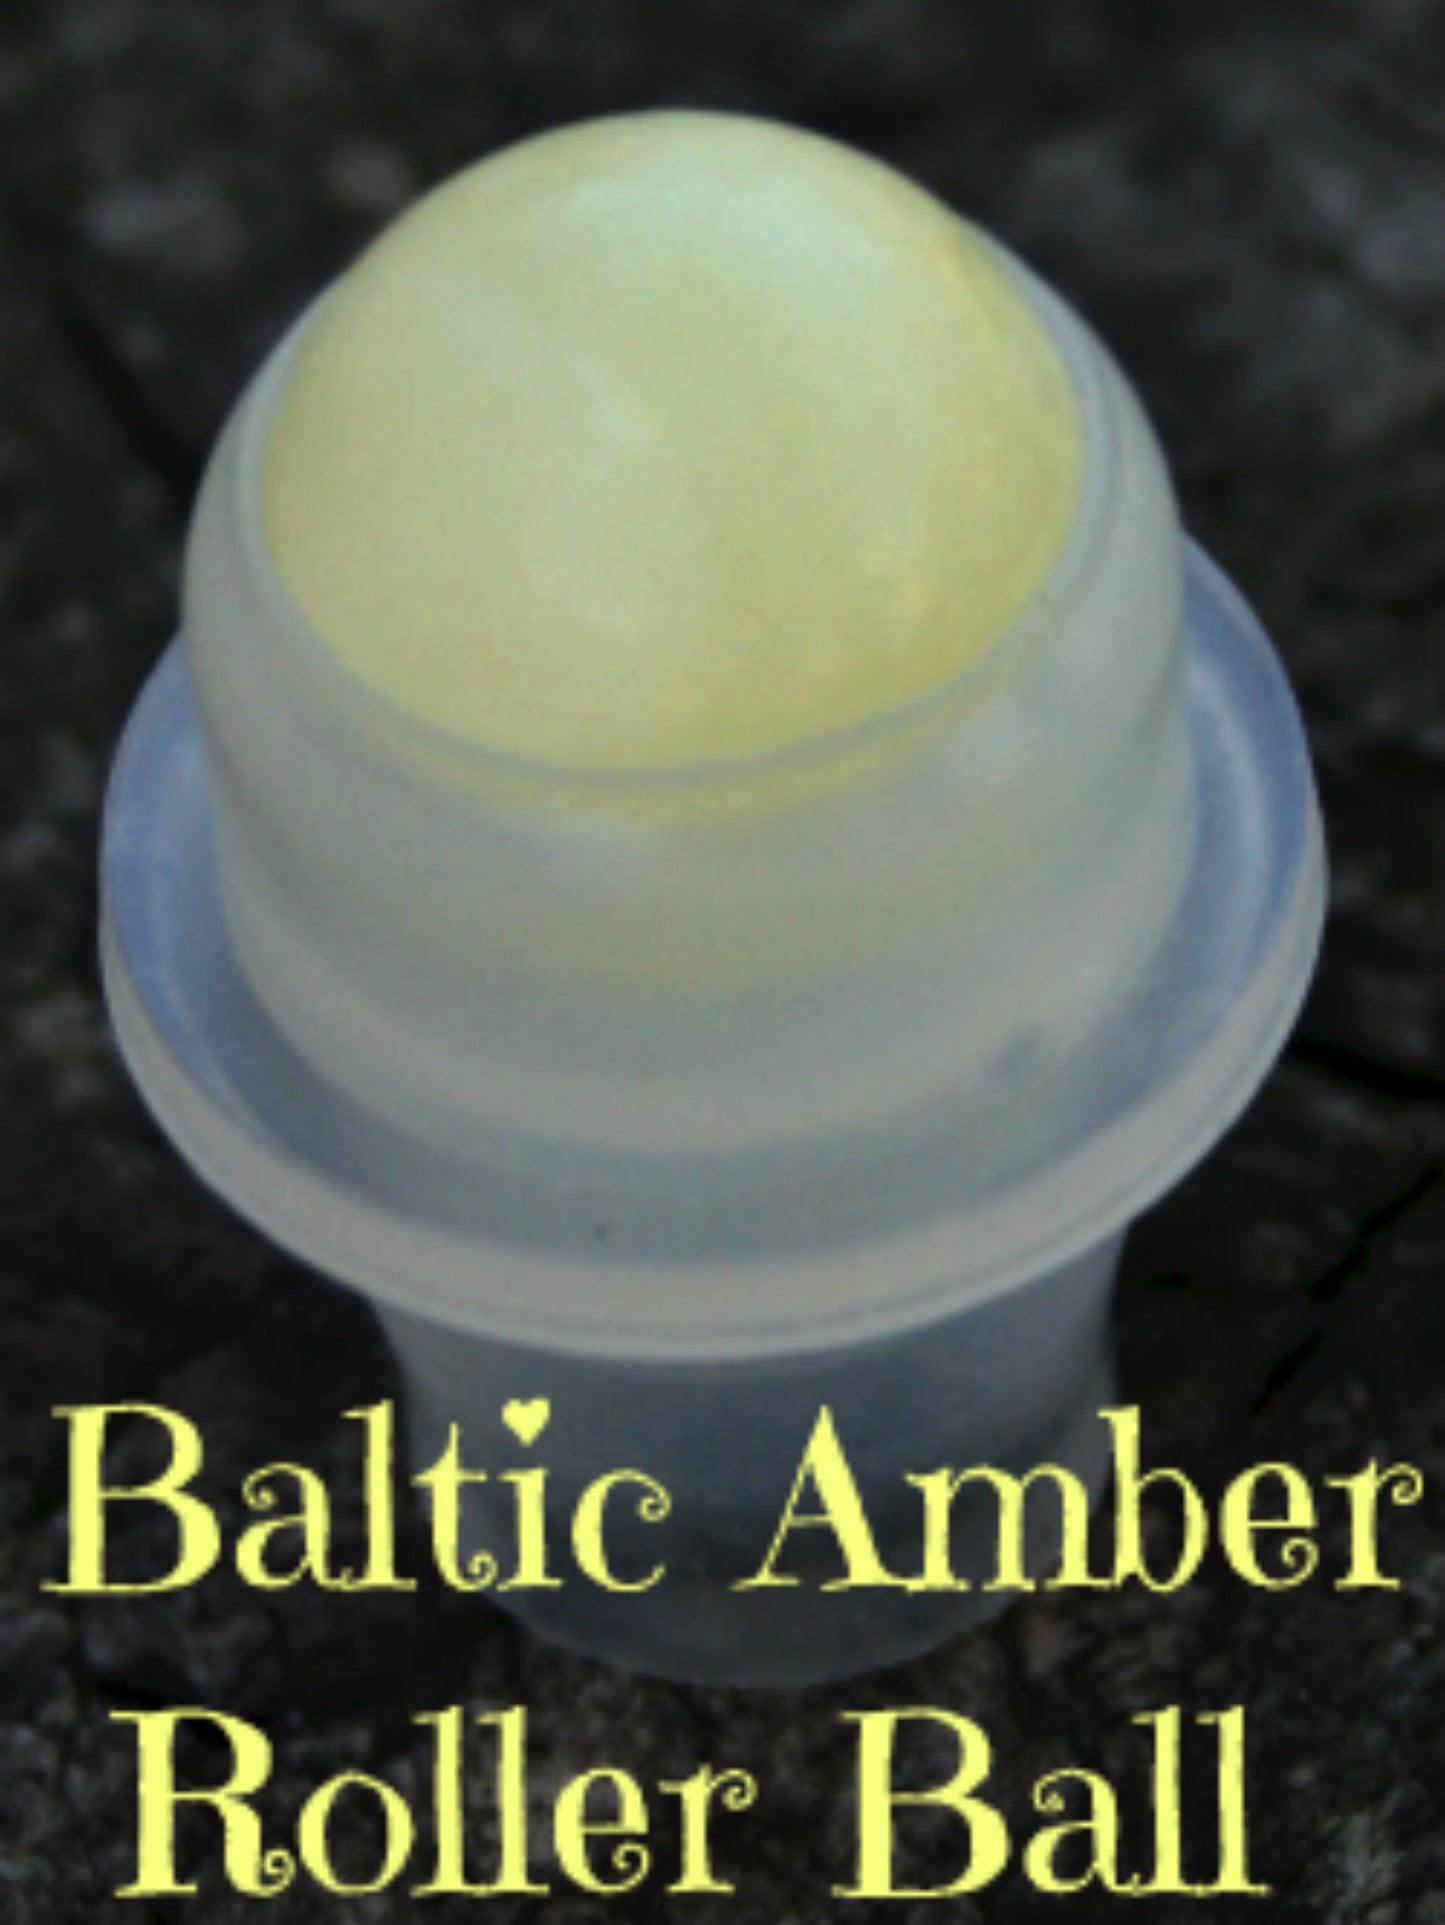 This listing is for any of our special essential oil blends in 10ml roller bottles with the Baltic amber roller ball. These roller balls are made out of 100% raw milky colored Baltic amber. 